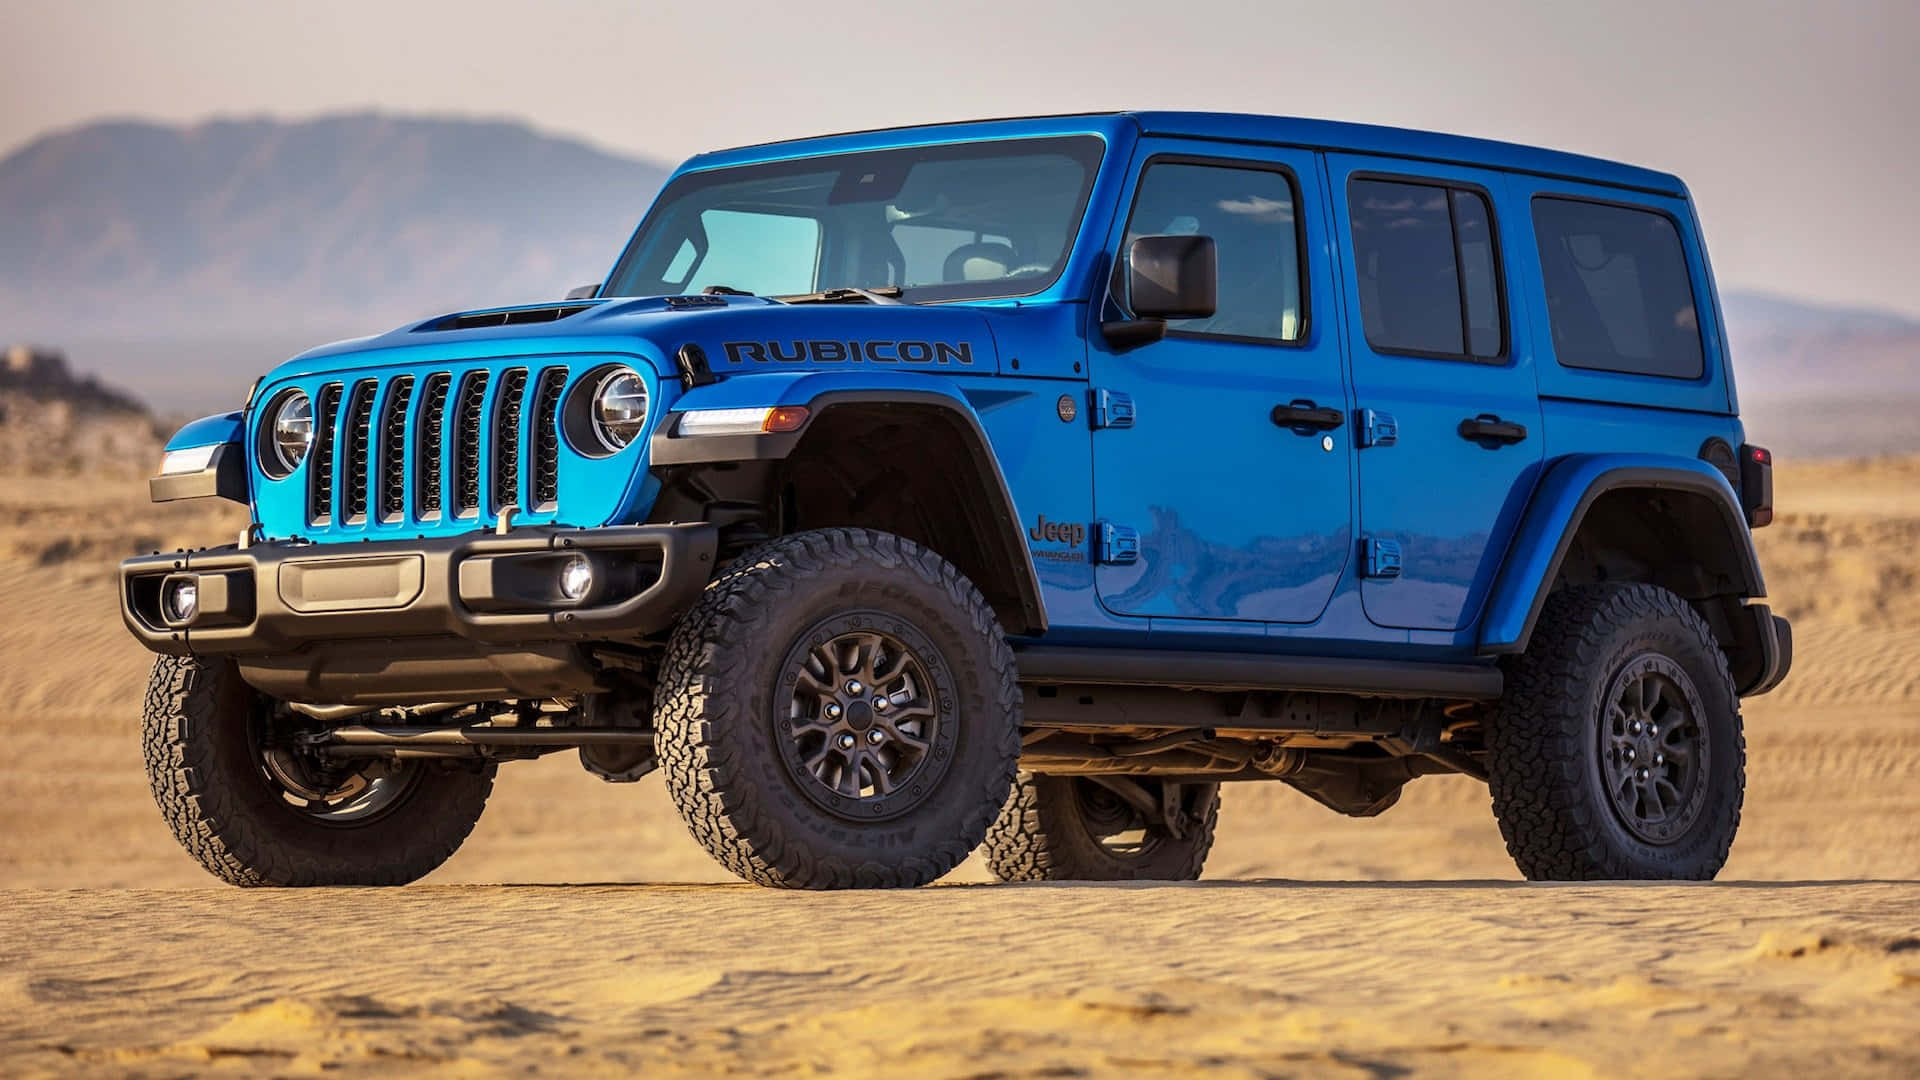 The Blue Jeep Wrangler Is Driving In The Desert